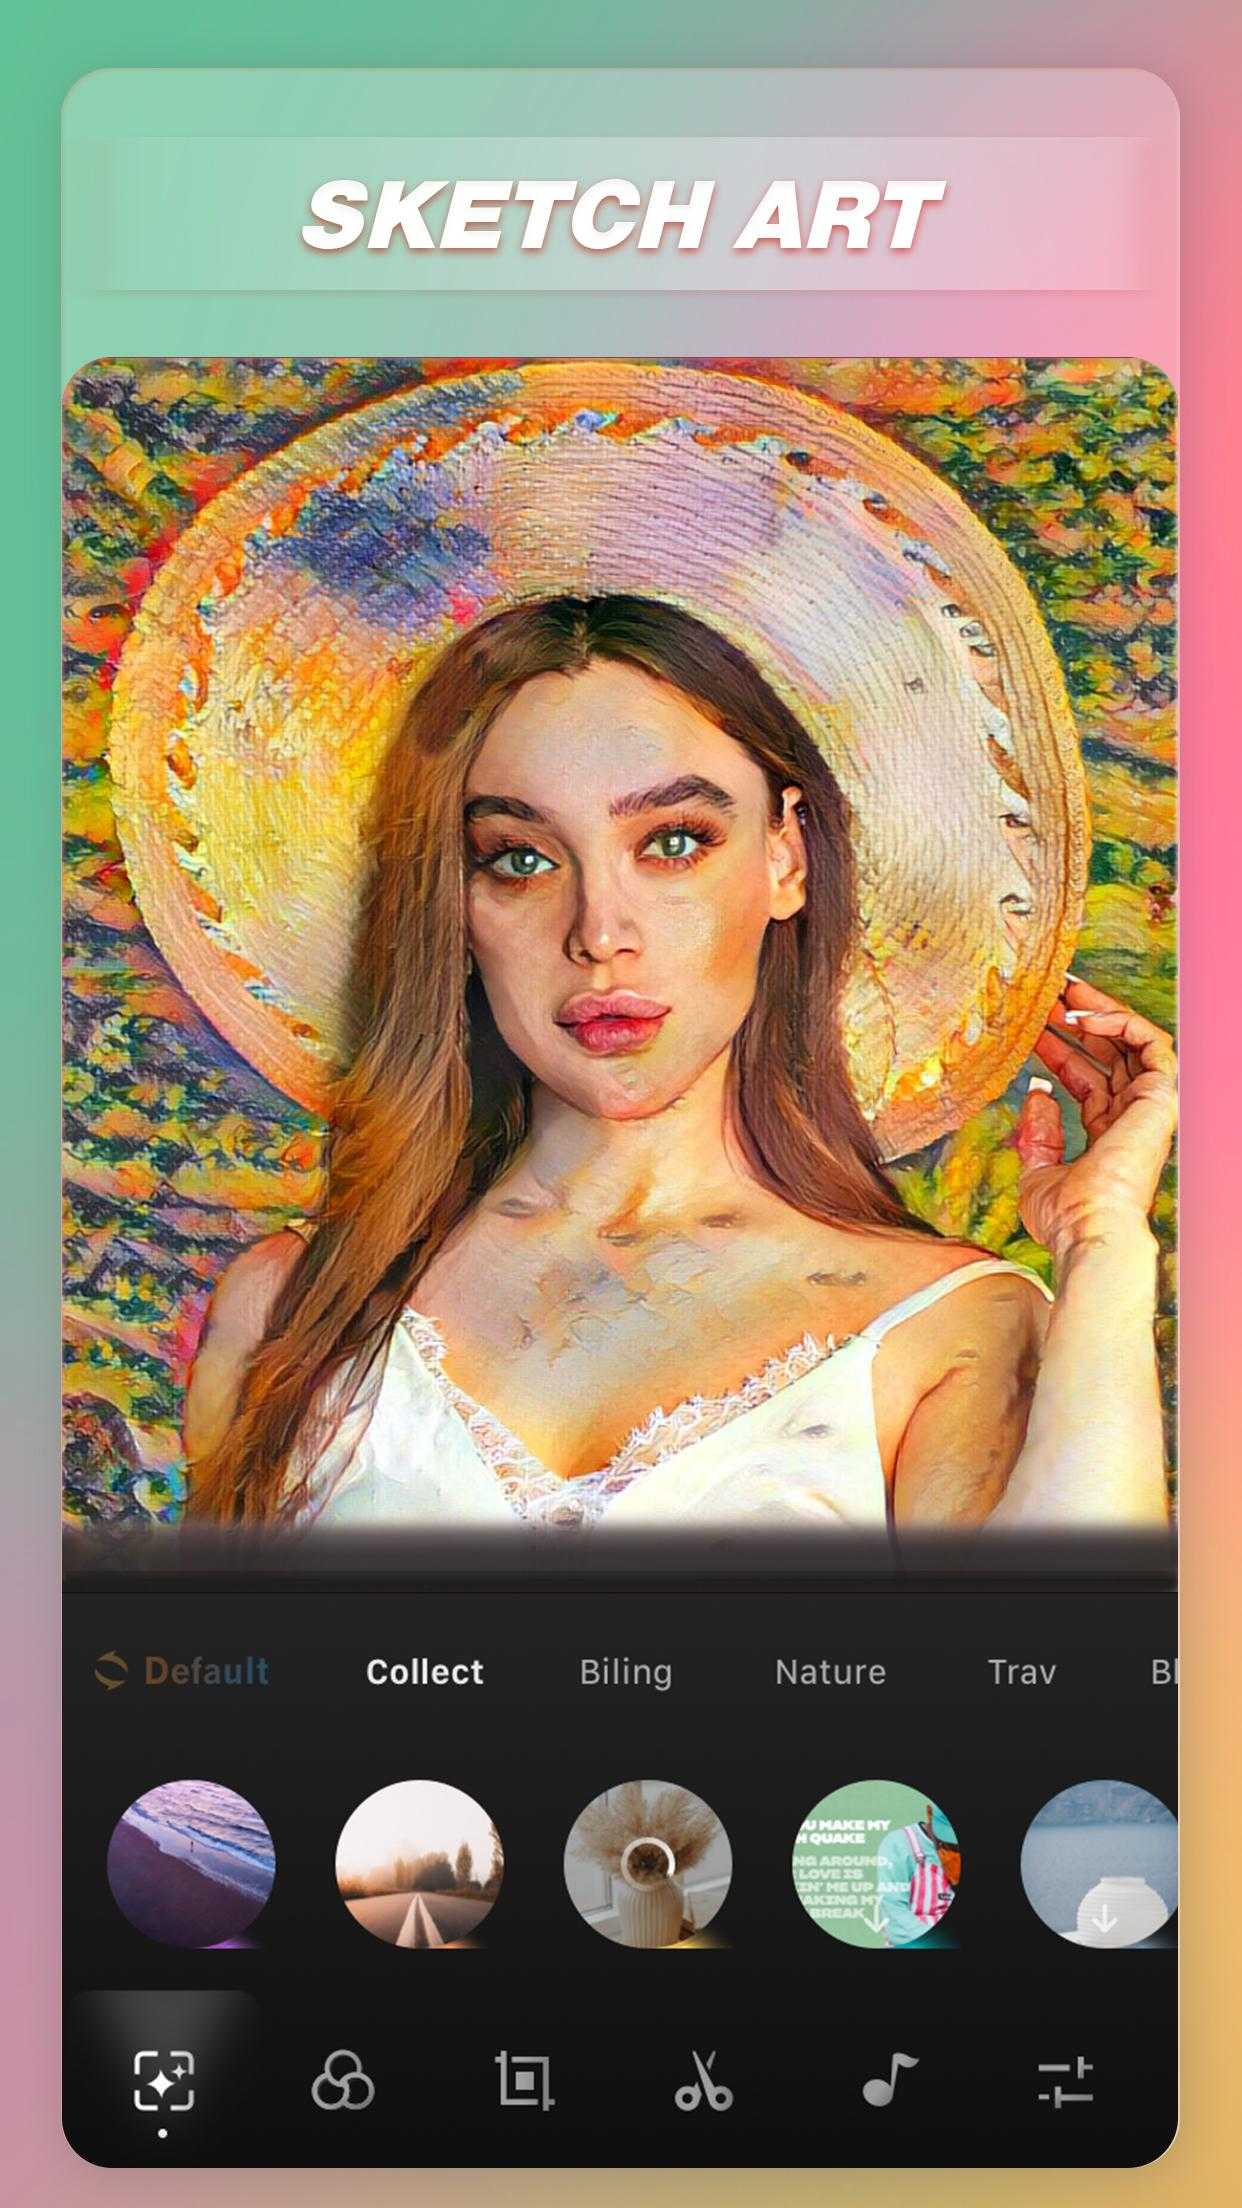 Video Effects & Aesthetic Filter Editor – Fito.ly v3.4.135 (Mod) (Premium) APK